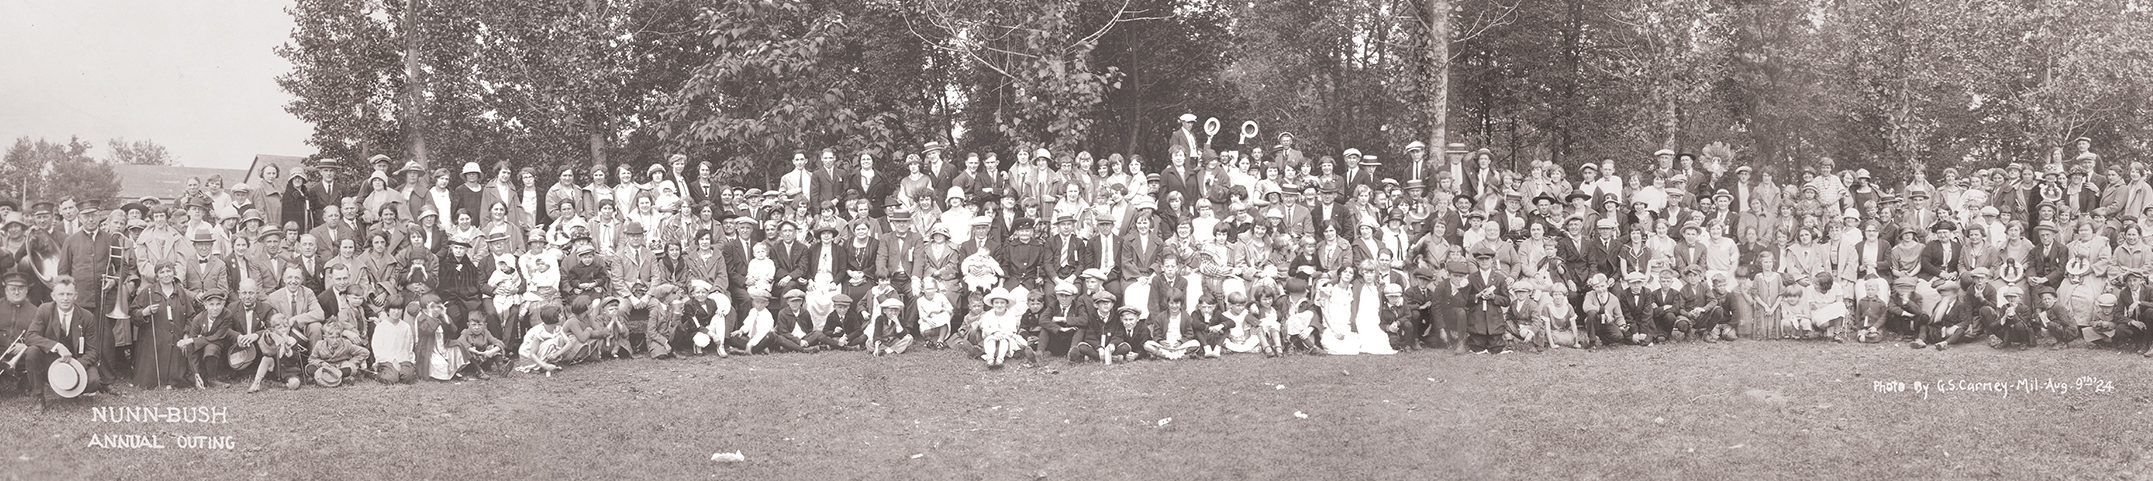 The featured image is a photograph of the Nunn Bush staff at the annual outing on August 9, 1924.